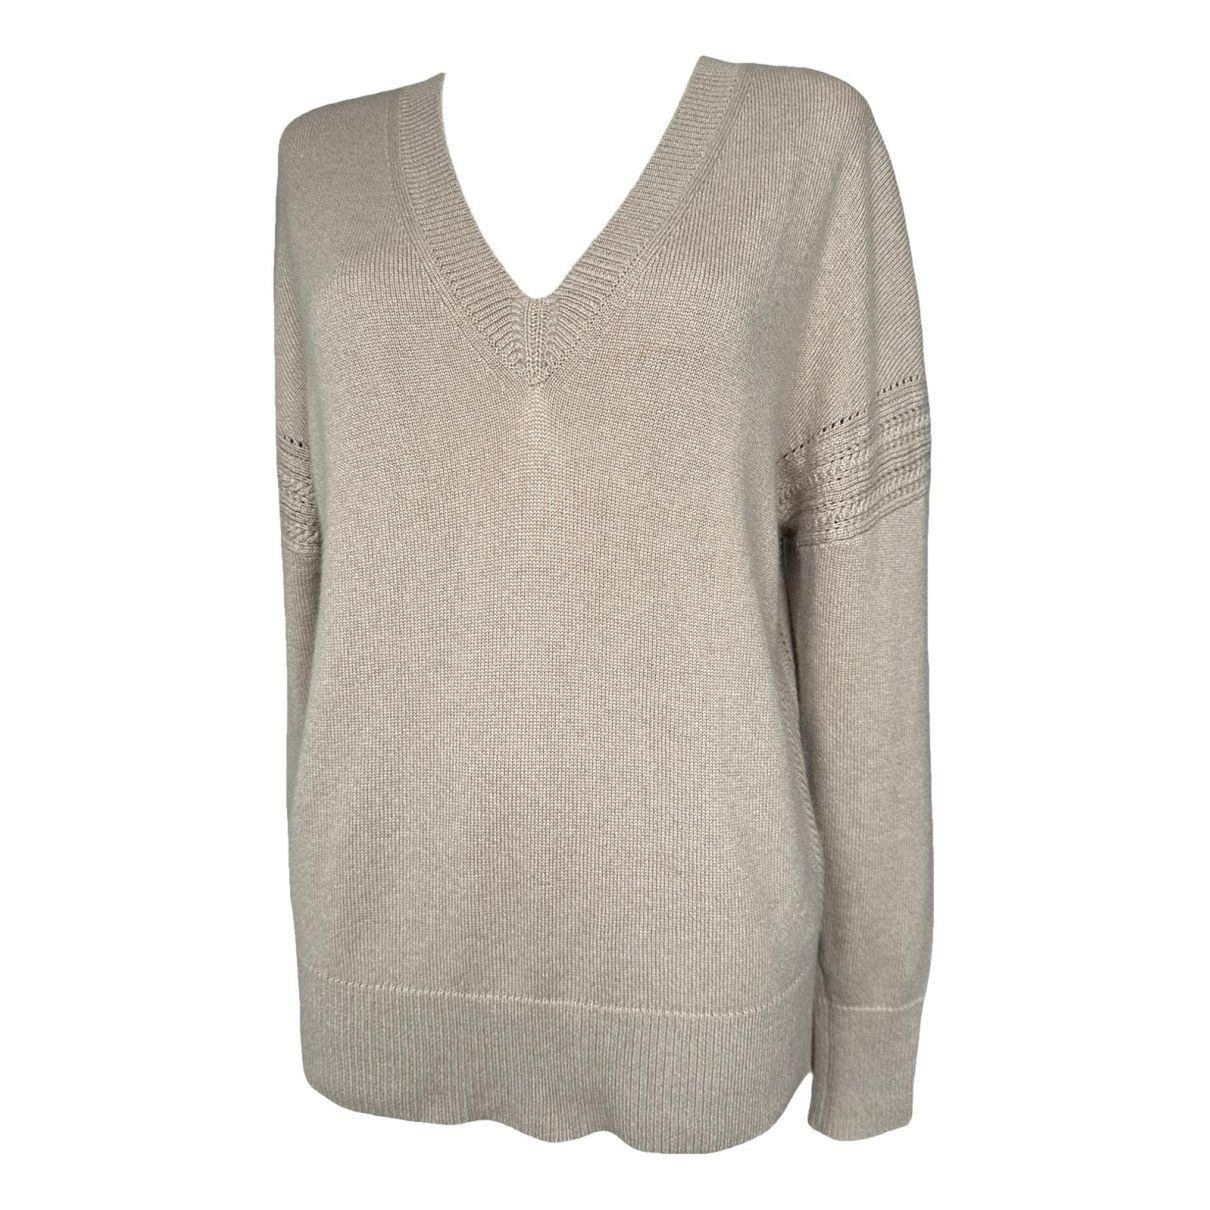 Cashmere jumper by BURBERRY